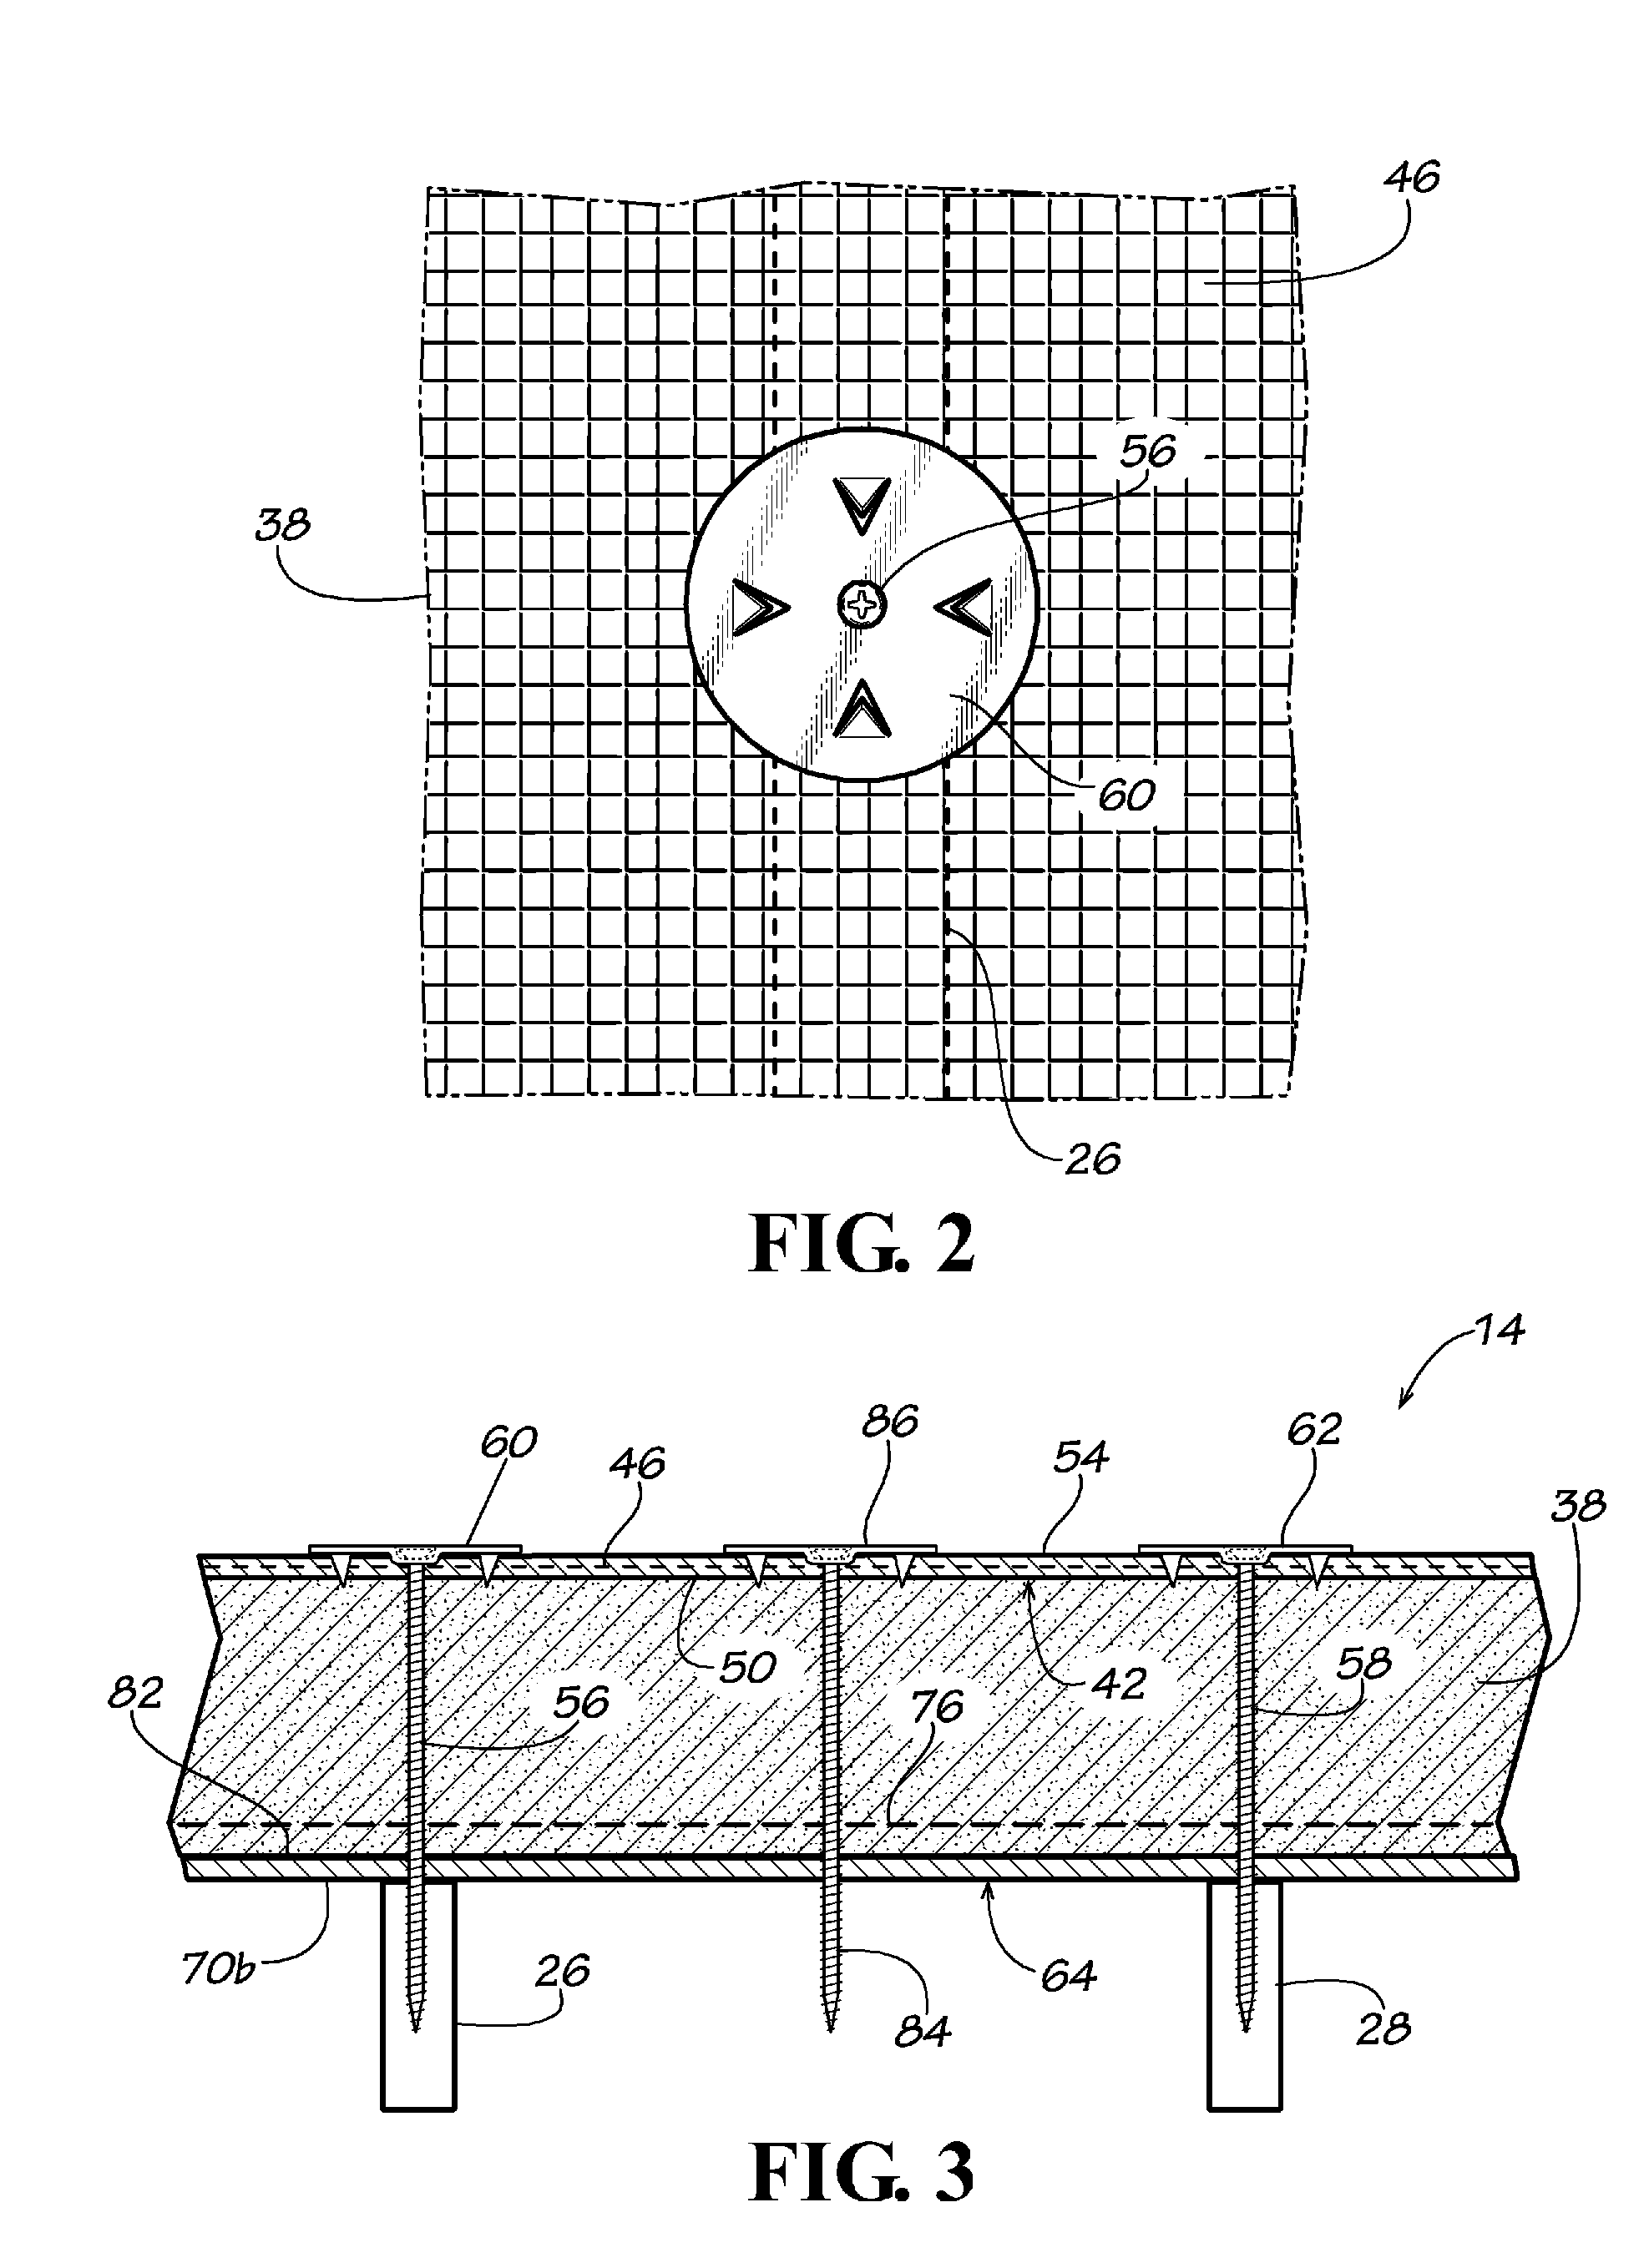 Insulated reinforced foam sheathing, reinforced elastomeric vapor permeable air barrier foam panel and method of making and using same